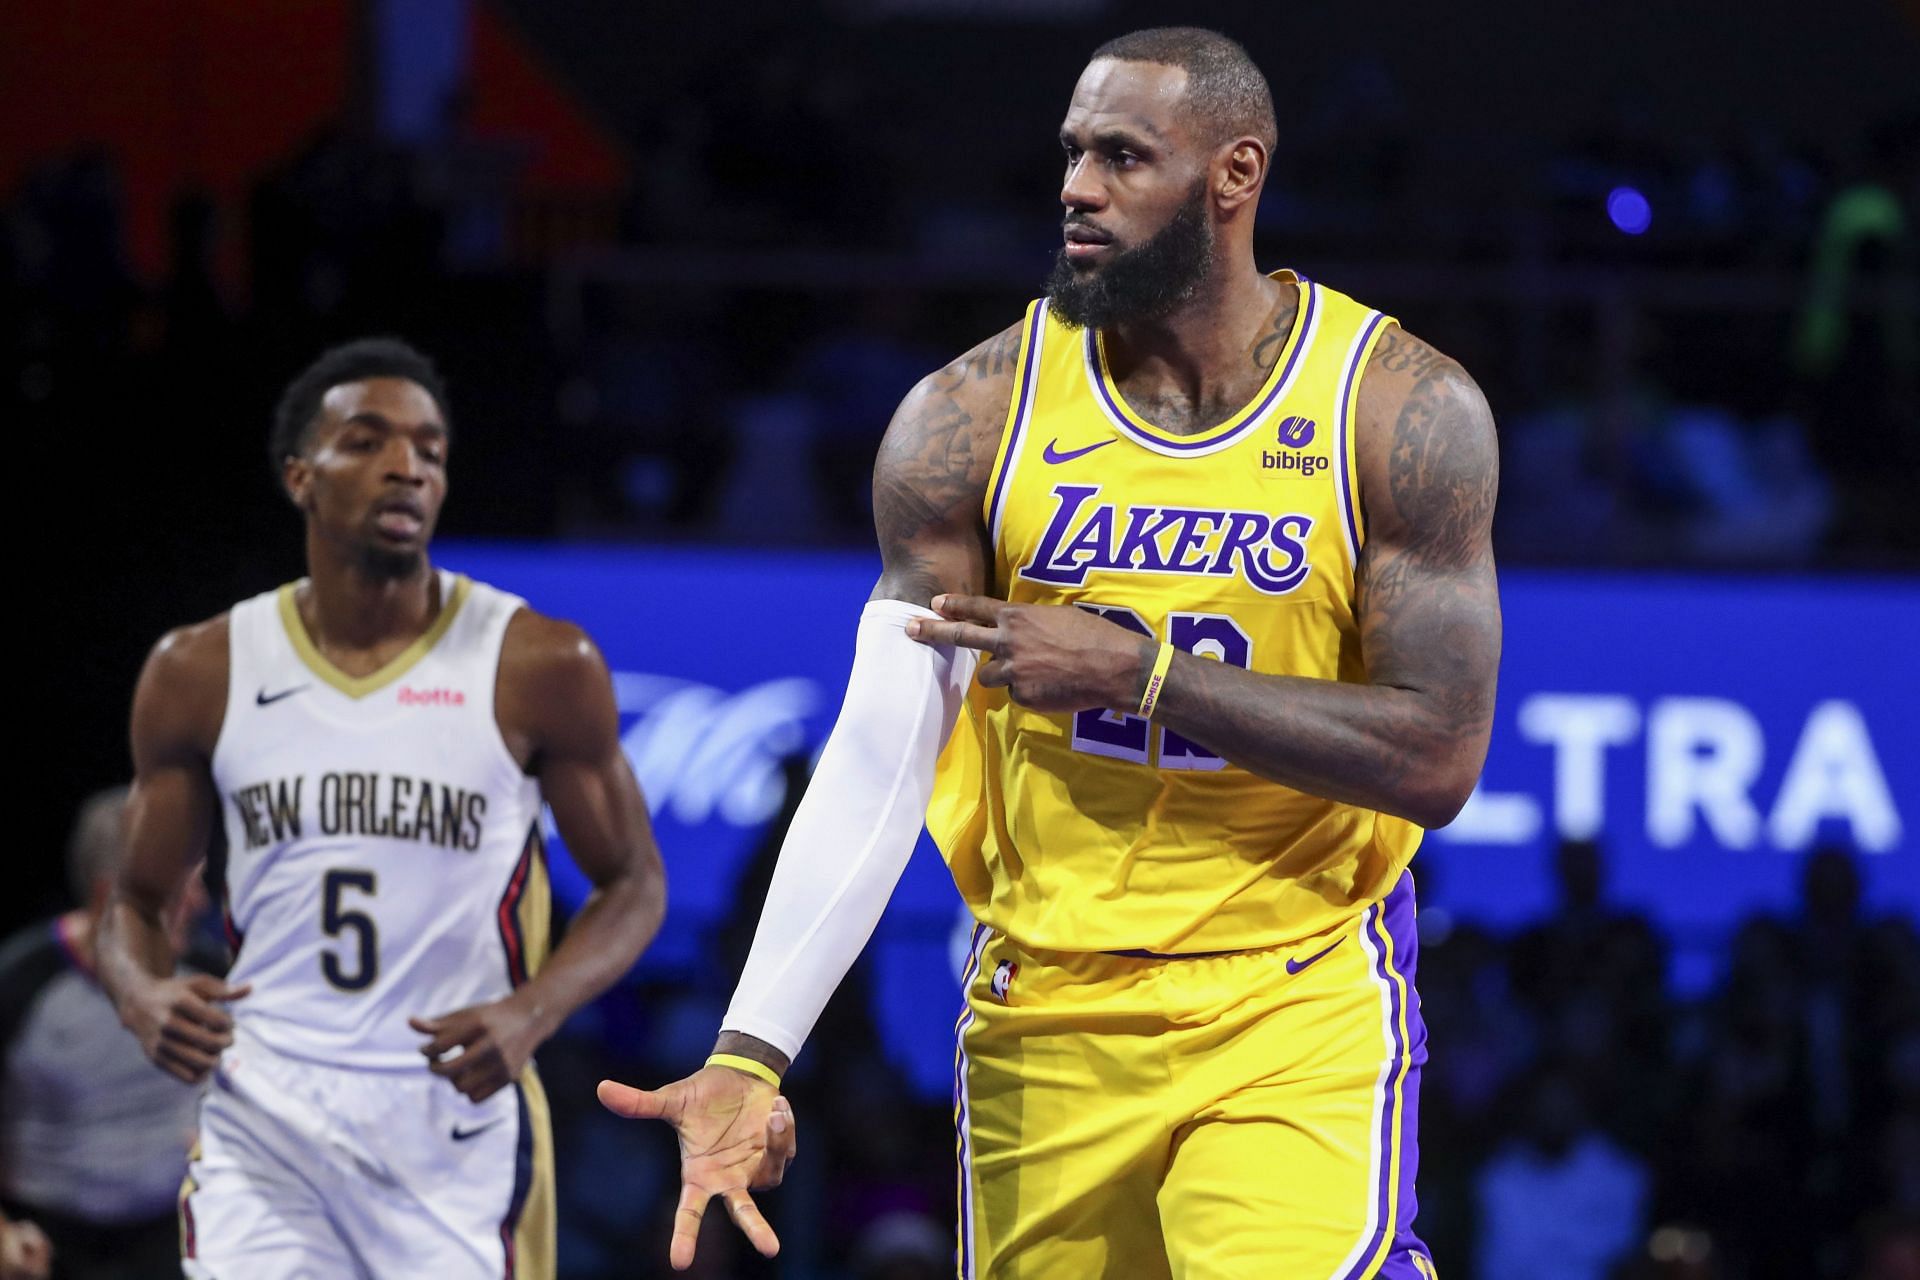 LeBron James of the LA Lakers against the New Orleans Pelicans